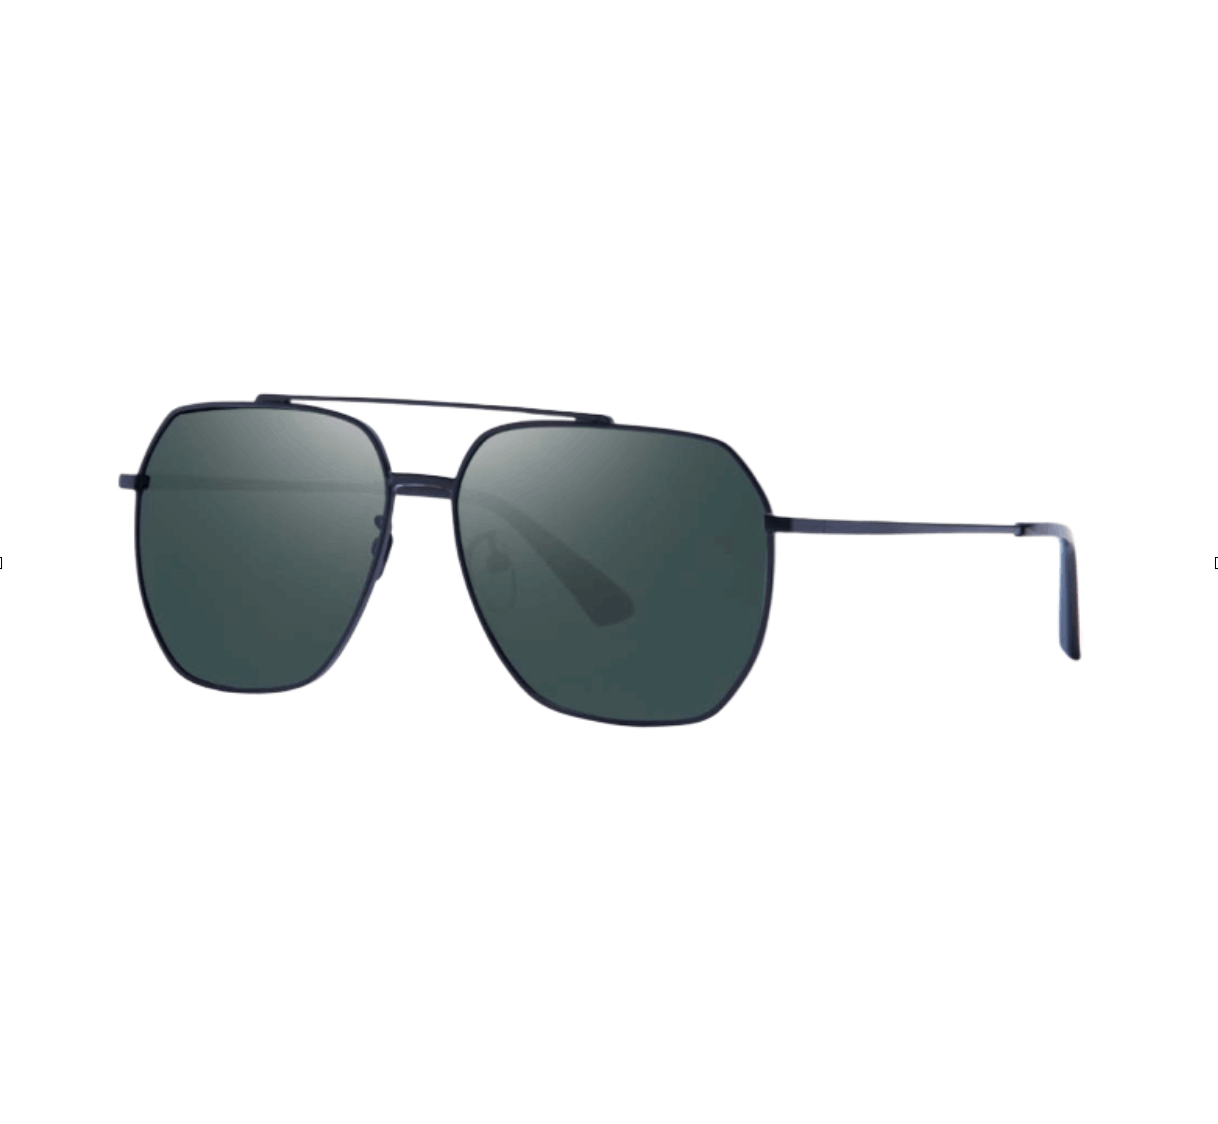 Chinese Sunglasses Manufacturers - Sunglasses Factory in China_Metal sunglasses mens